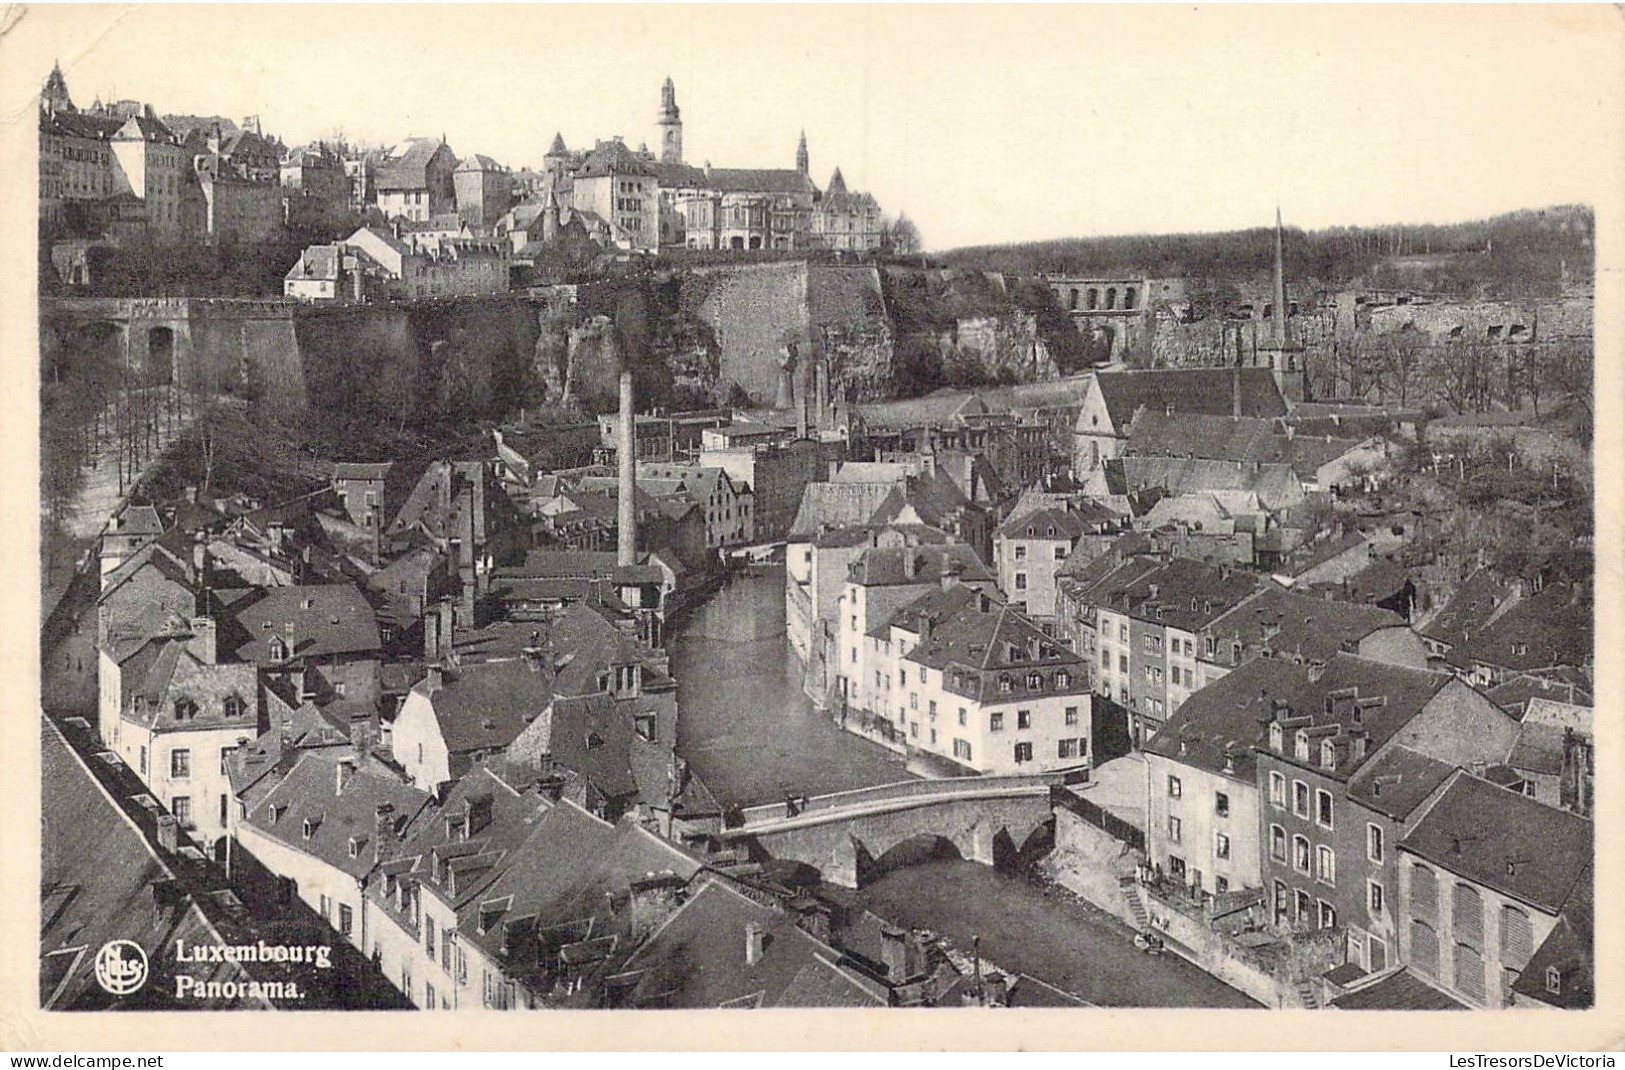 LUXEMBOURG - Panorama - Carte Postale Ancienne - Luxemburg - Town